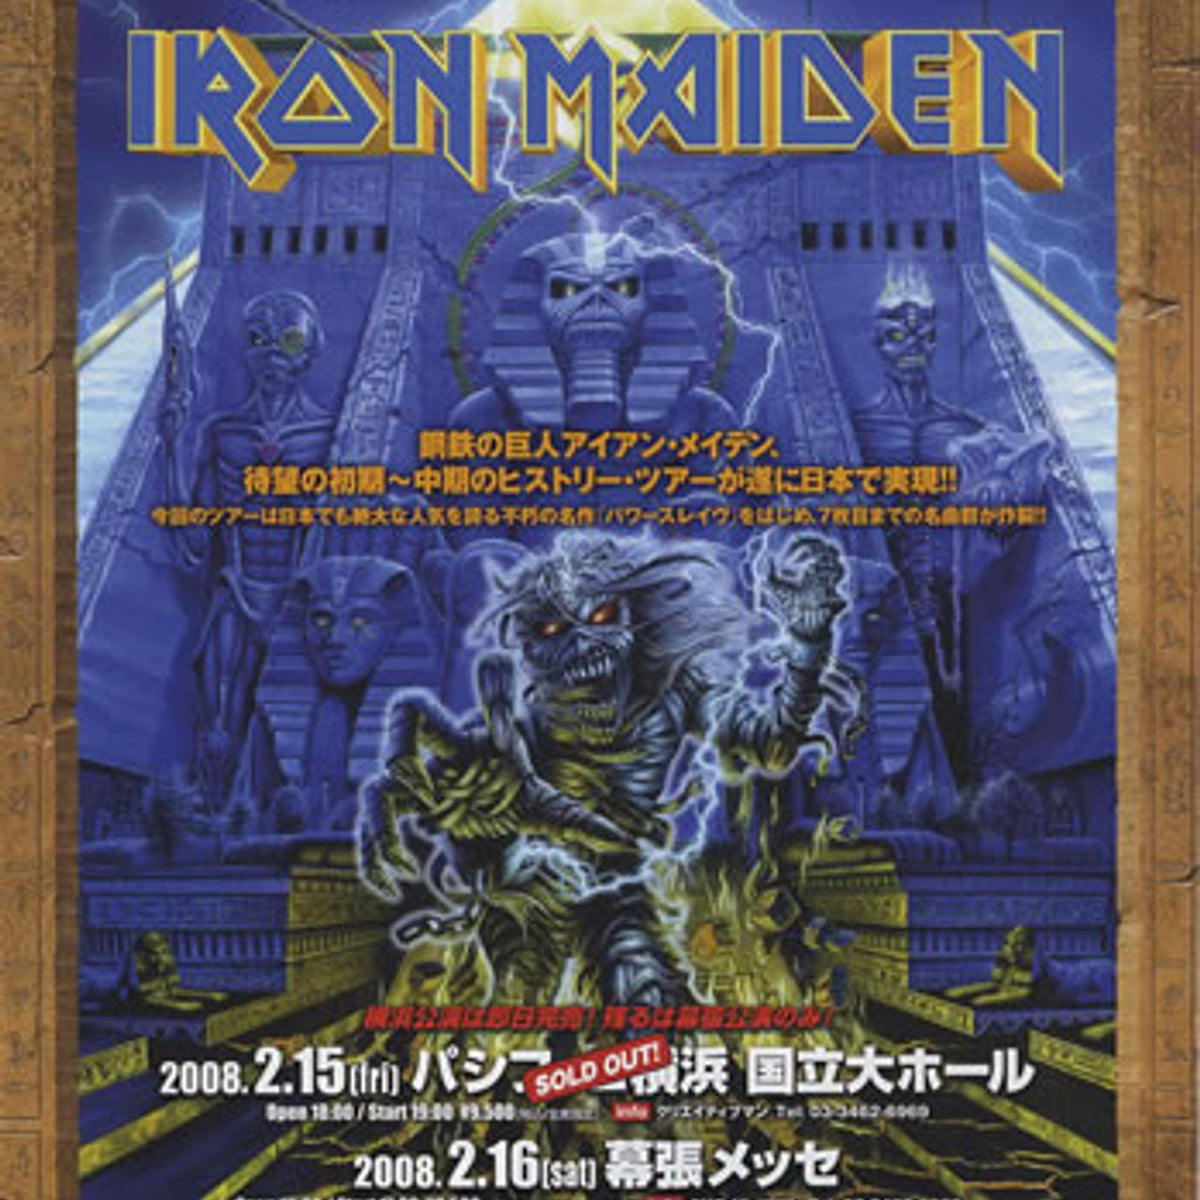 Sold at Auction: IRON MAIDEN SOMEWHERE BACK IN TIME WORLD TOUR